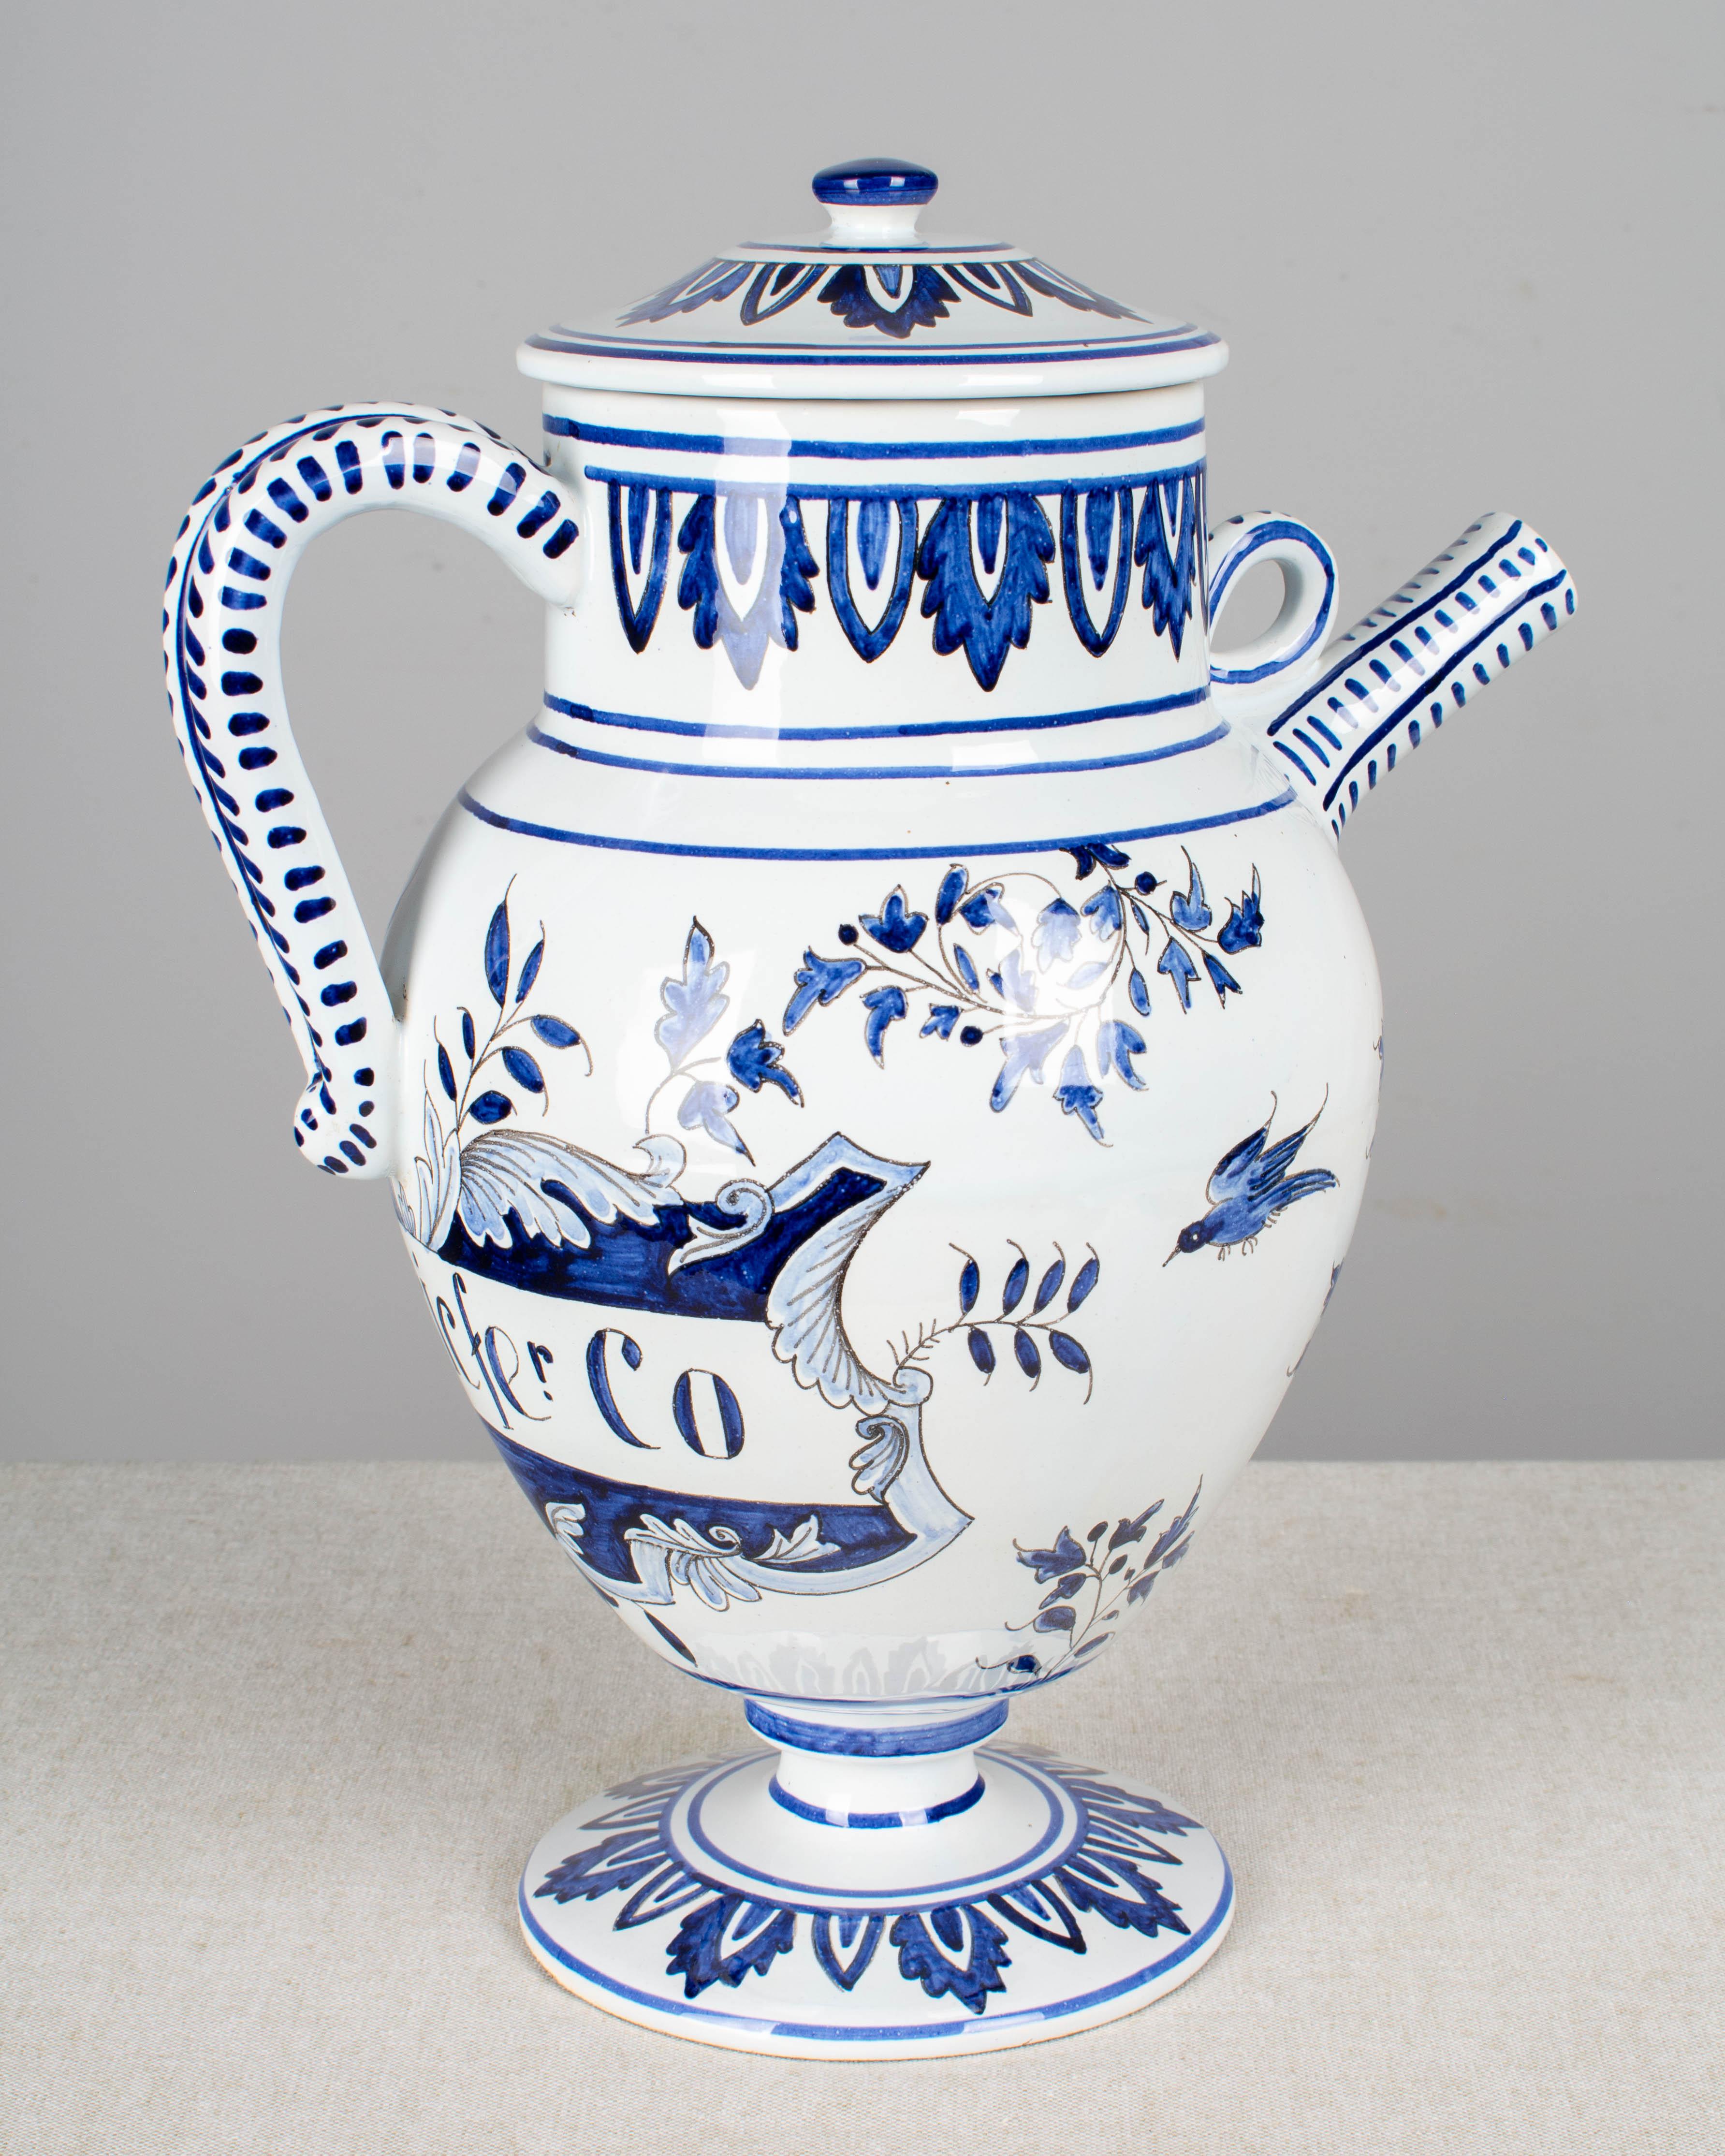 A delft apothecary jug, or pitcher, in the style of the 17th century with striped handle, narrow spout and lid. Hand painted in vivid blue with birds and flowers and decorative label under the handle: S. Decicfer. Co. Mark on bottom: AK.